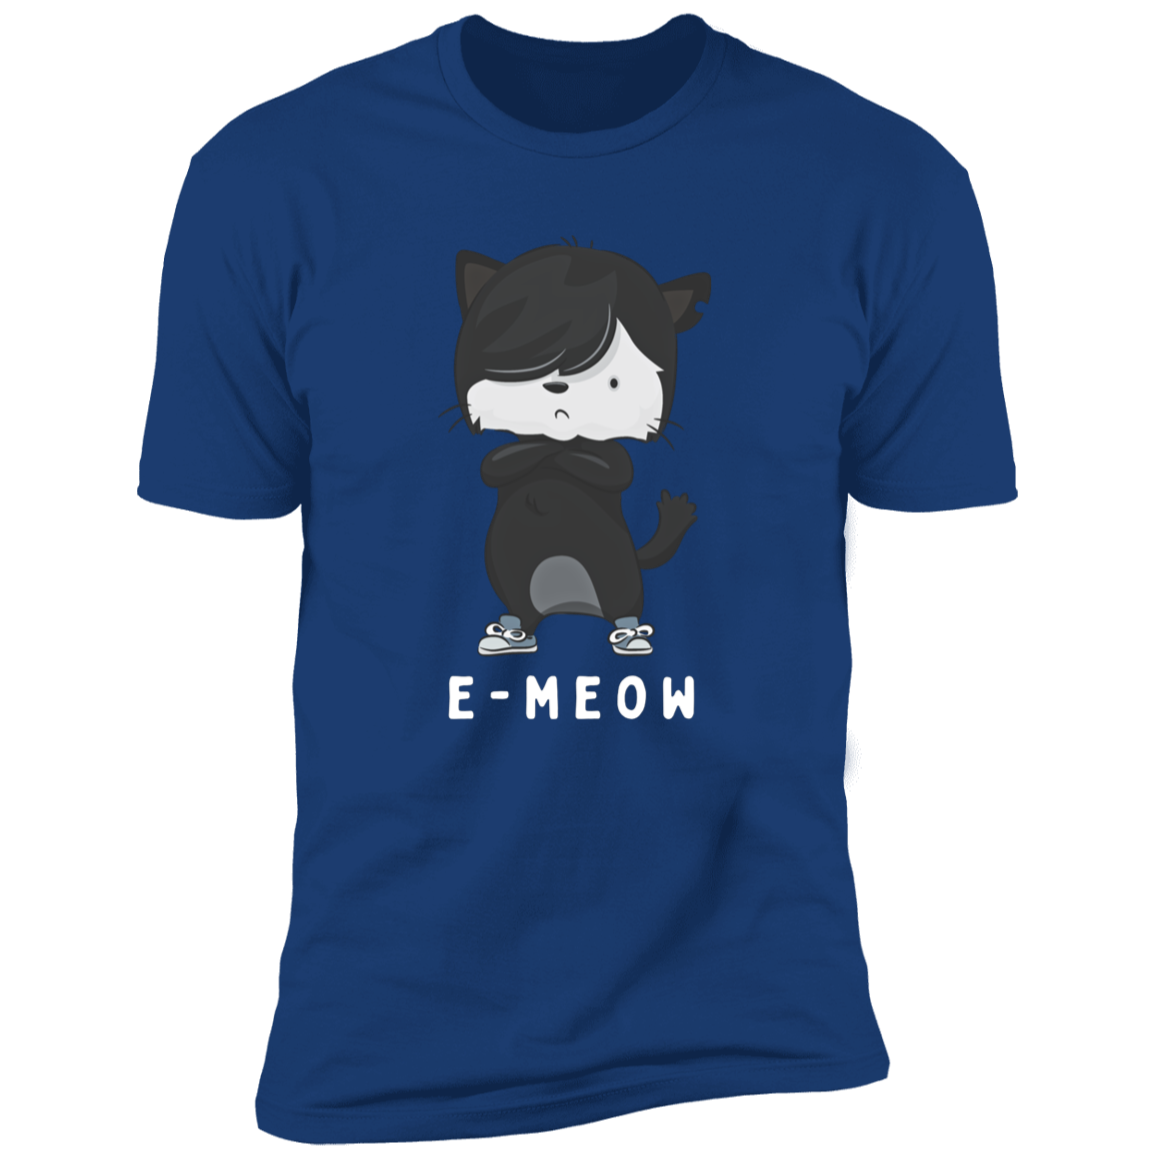 E-meow cat shirt, funny cat shirt for humans, cat mom and cat dad shirt, in royal blue